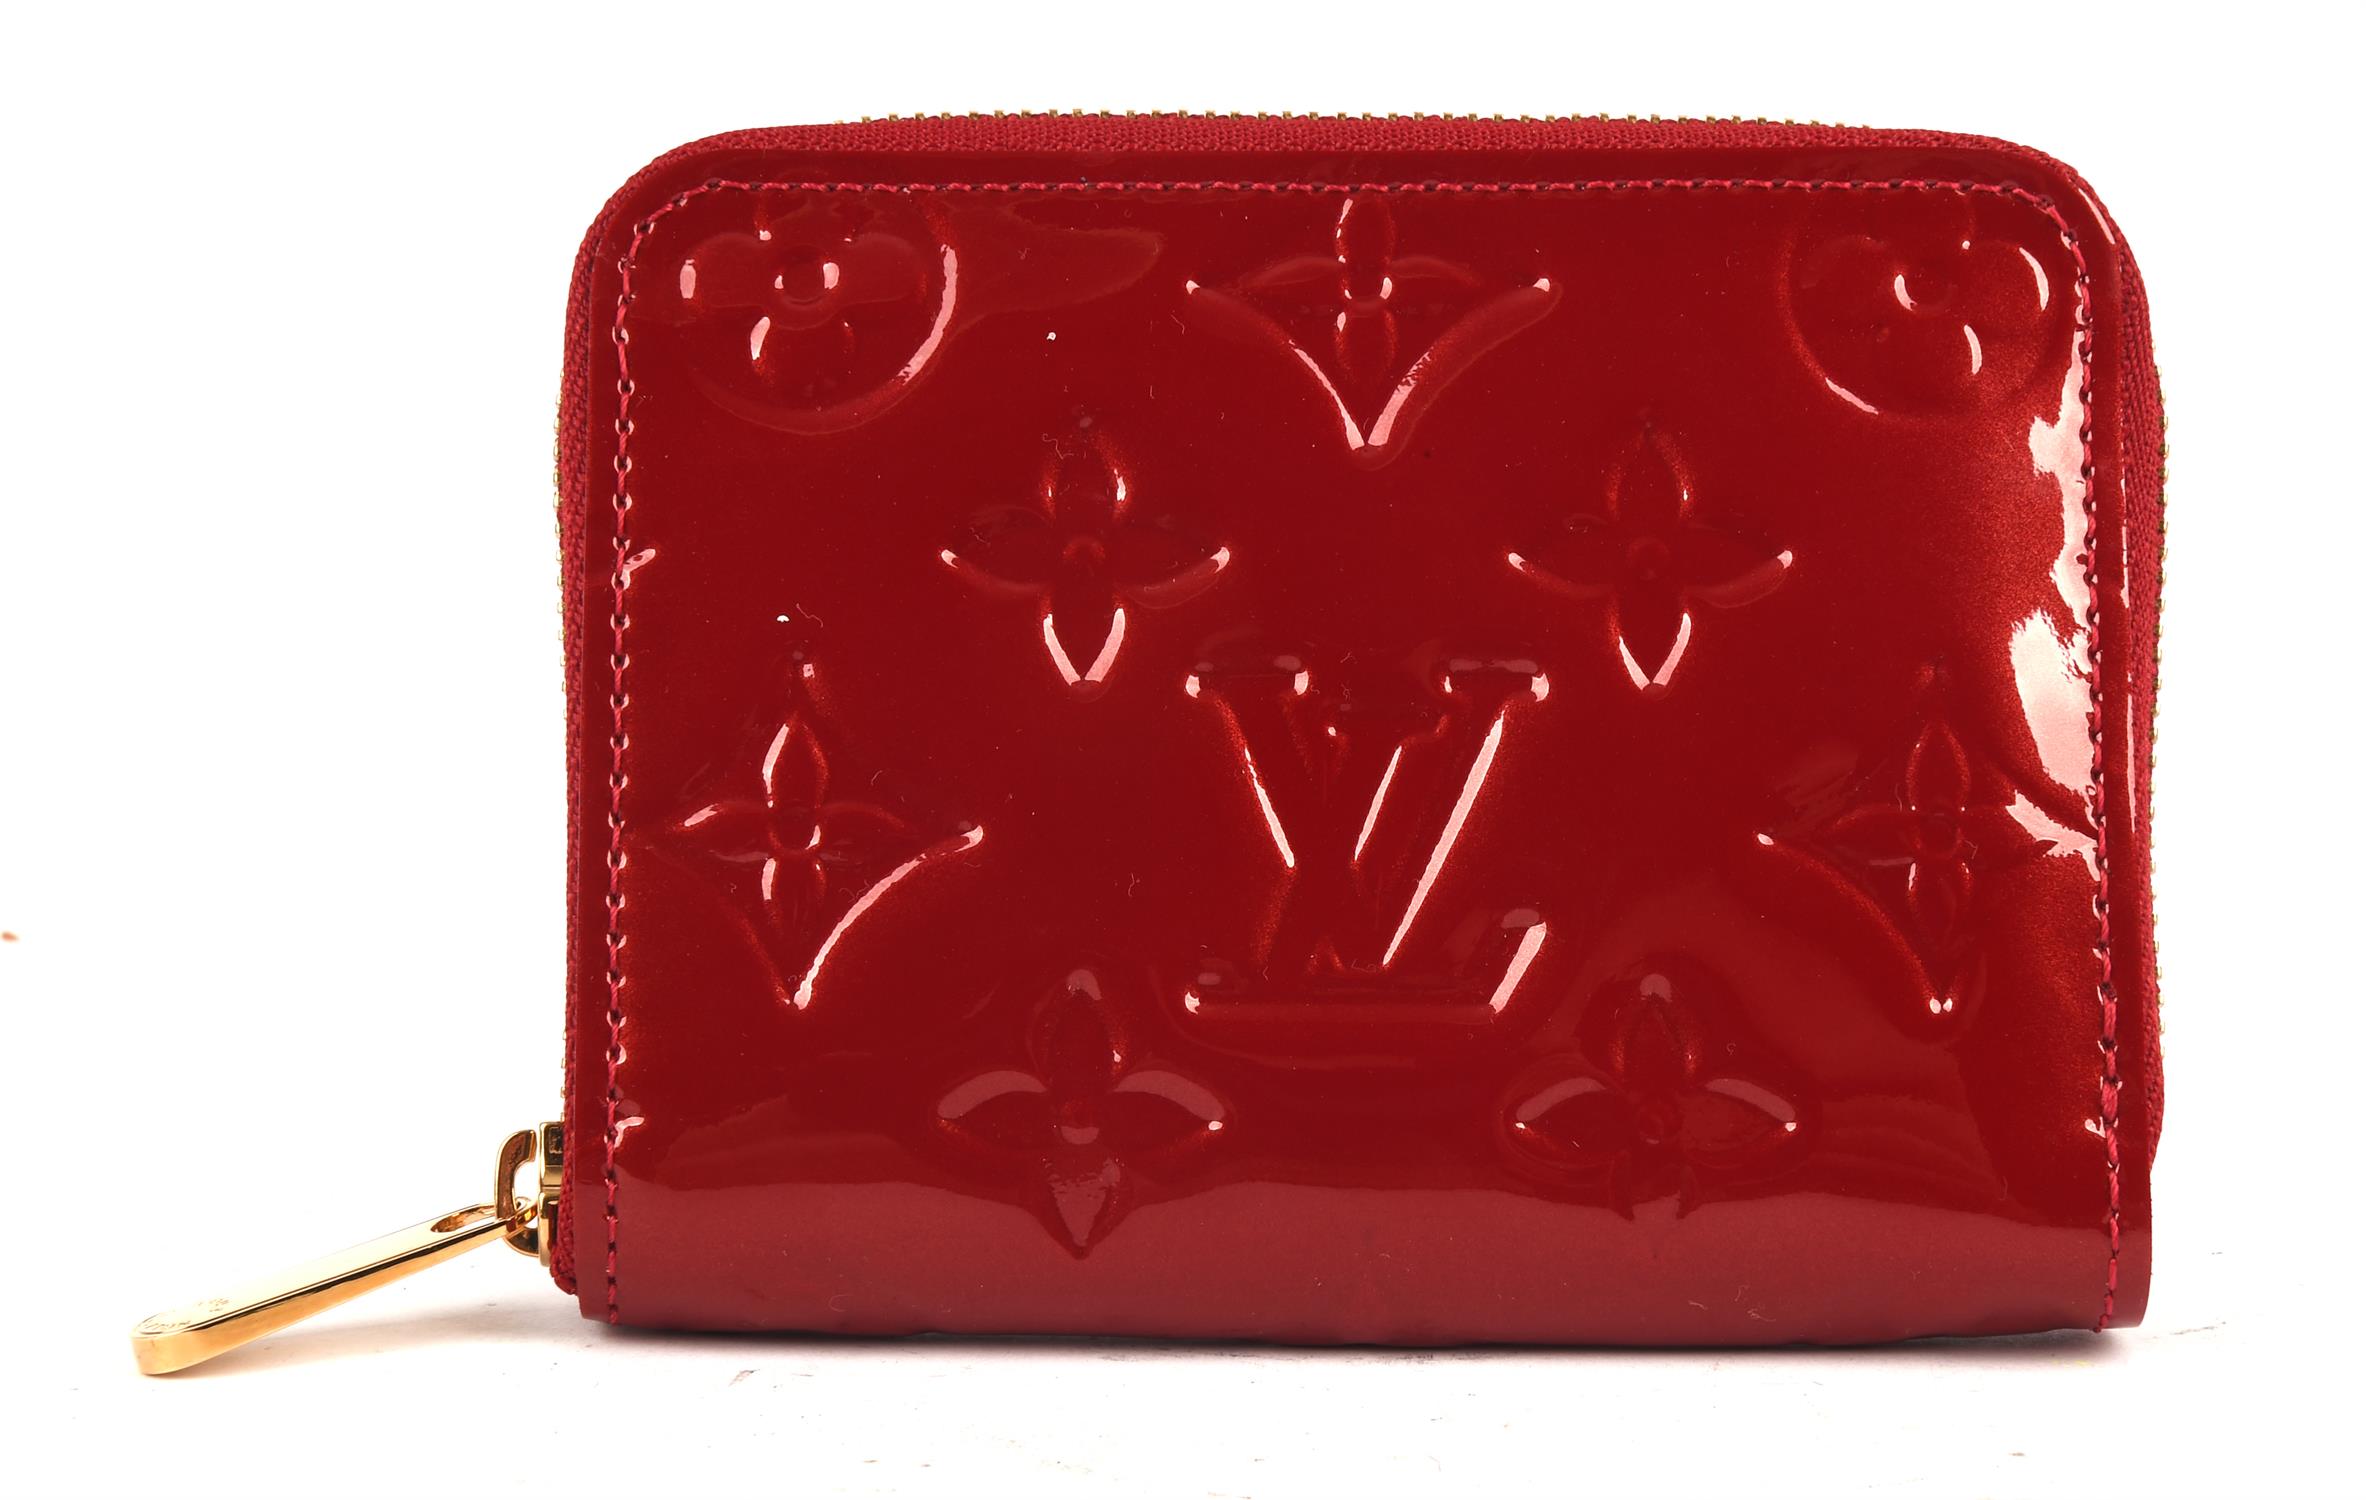 LOUIS VUITTON lipstick red Vernis varnished leather zipped purse in dust cover - Image 3 of 3